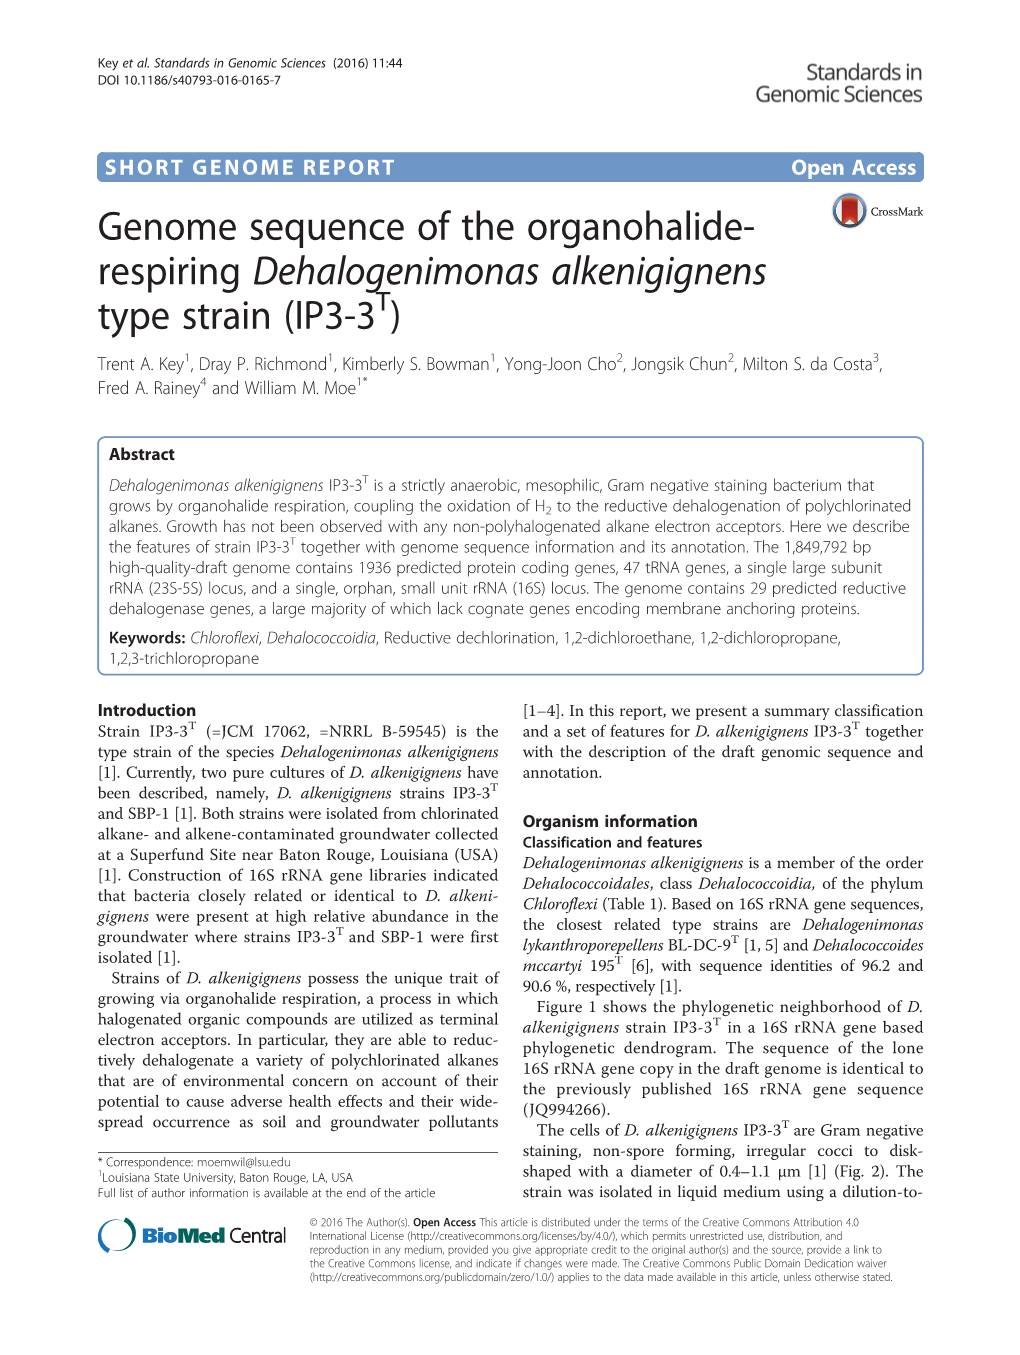 Genome Sequence of the Organohalide-Respiring